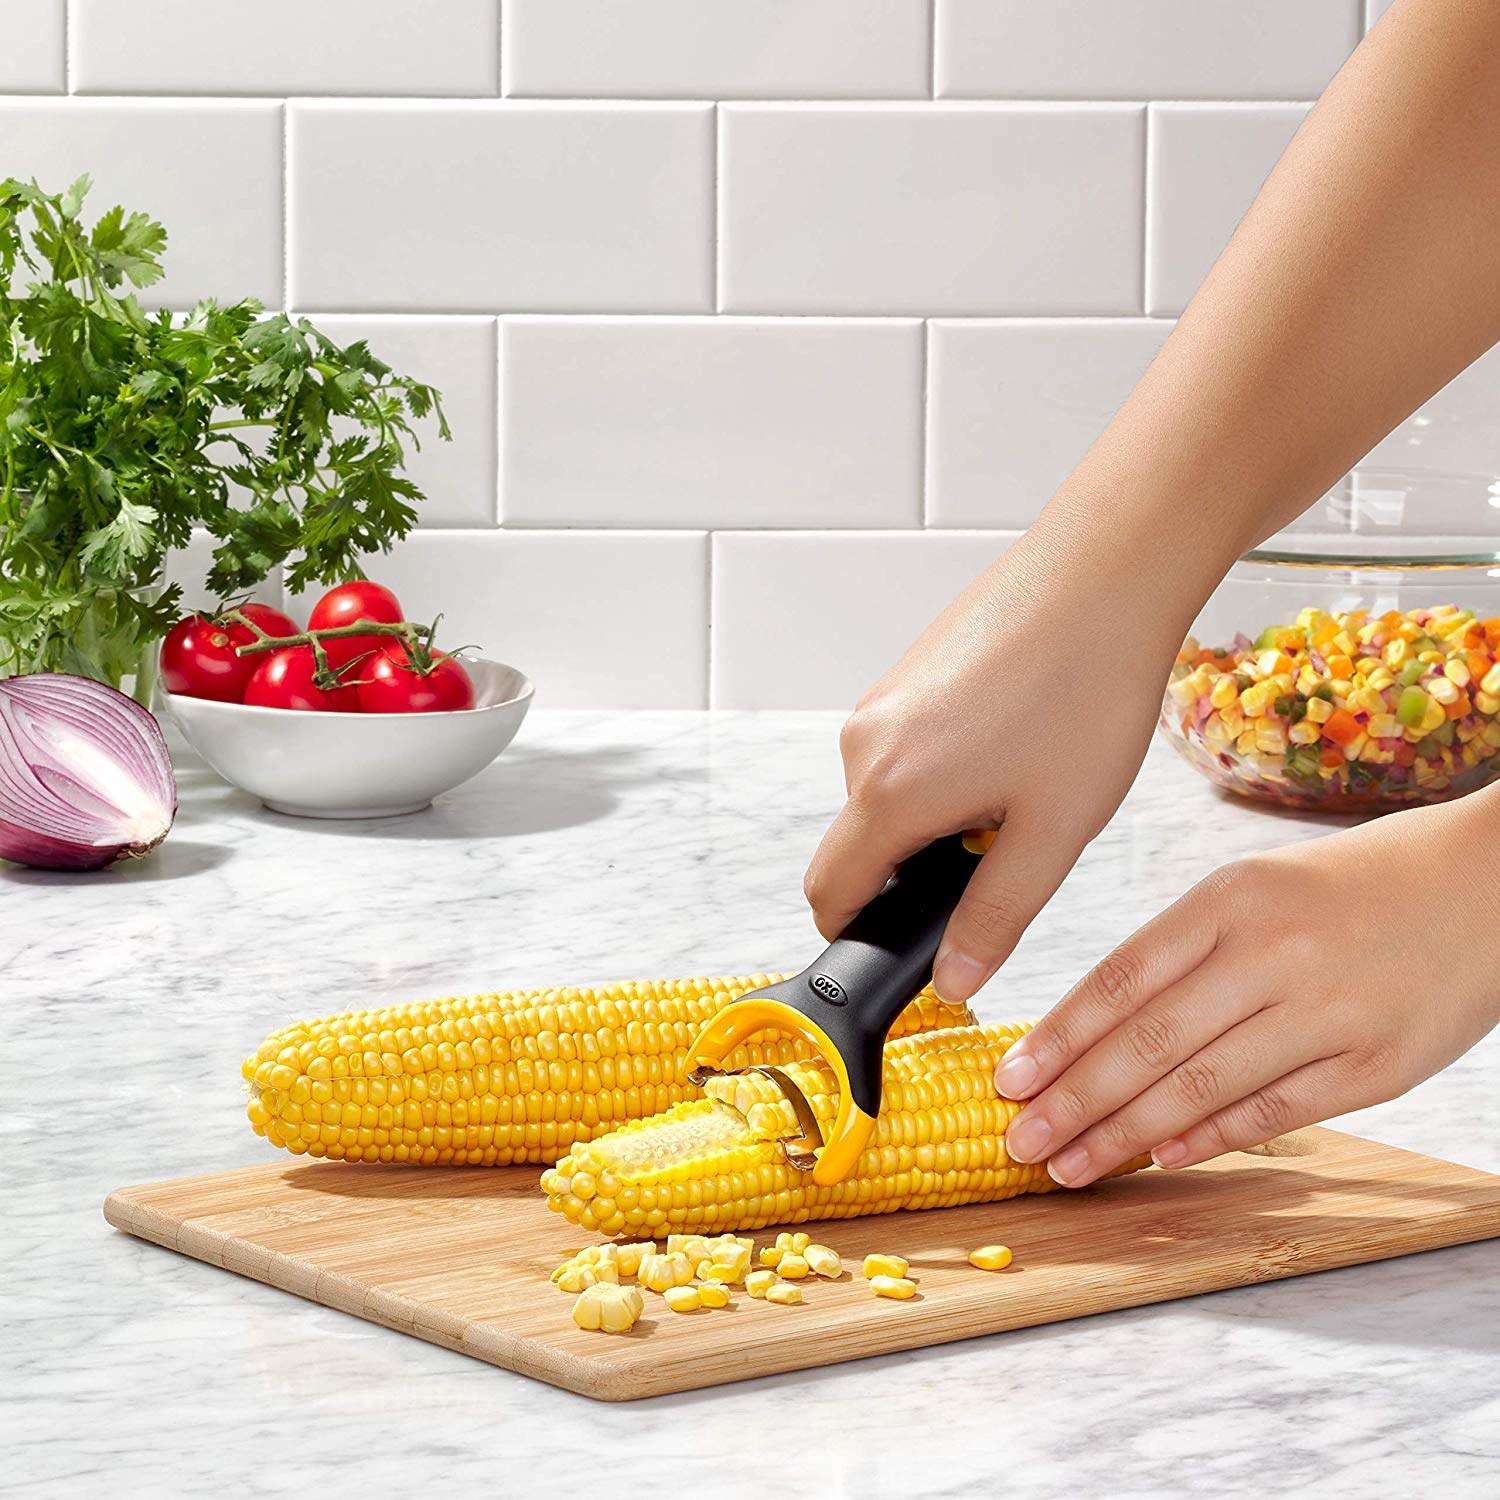 Model using tool to remove corn from cob